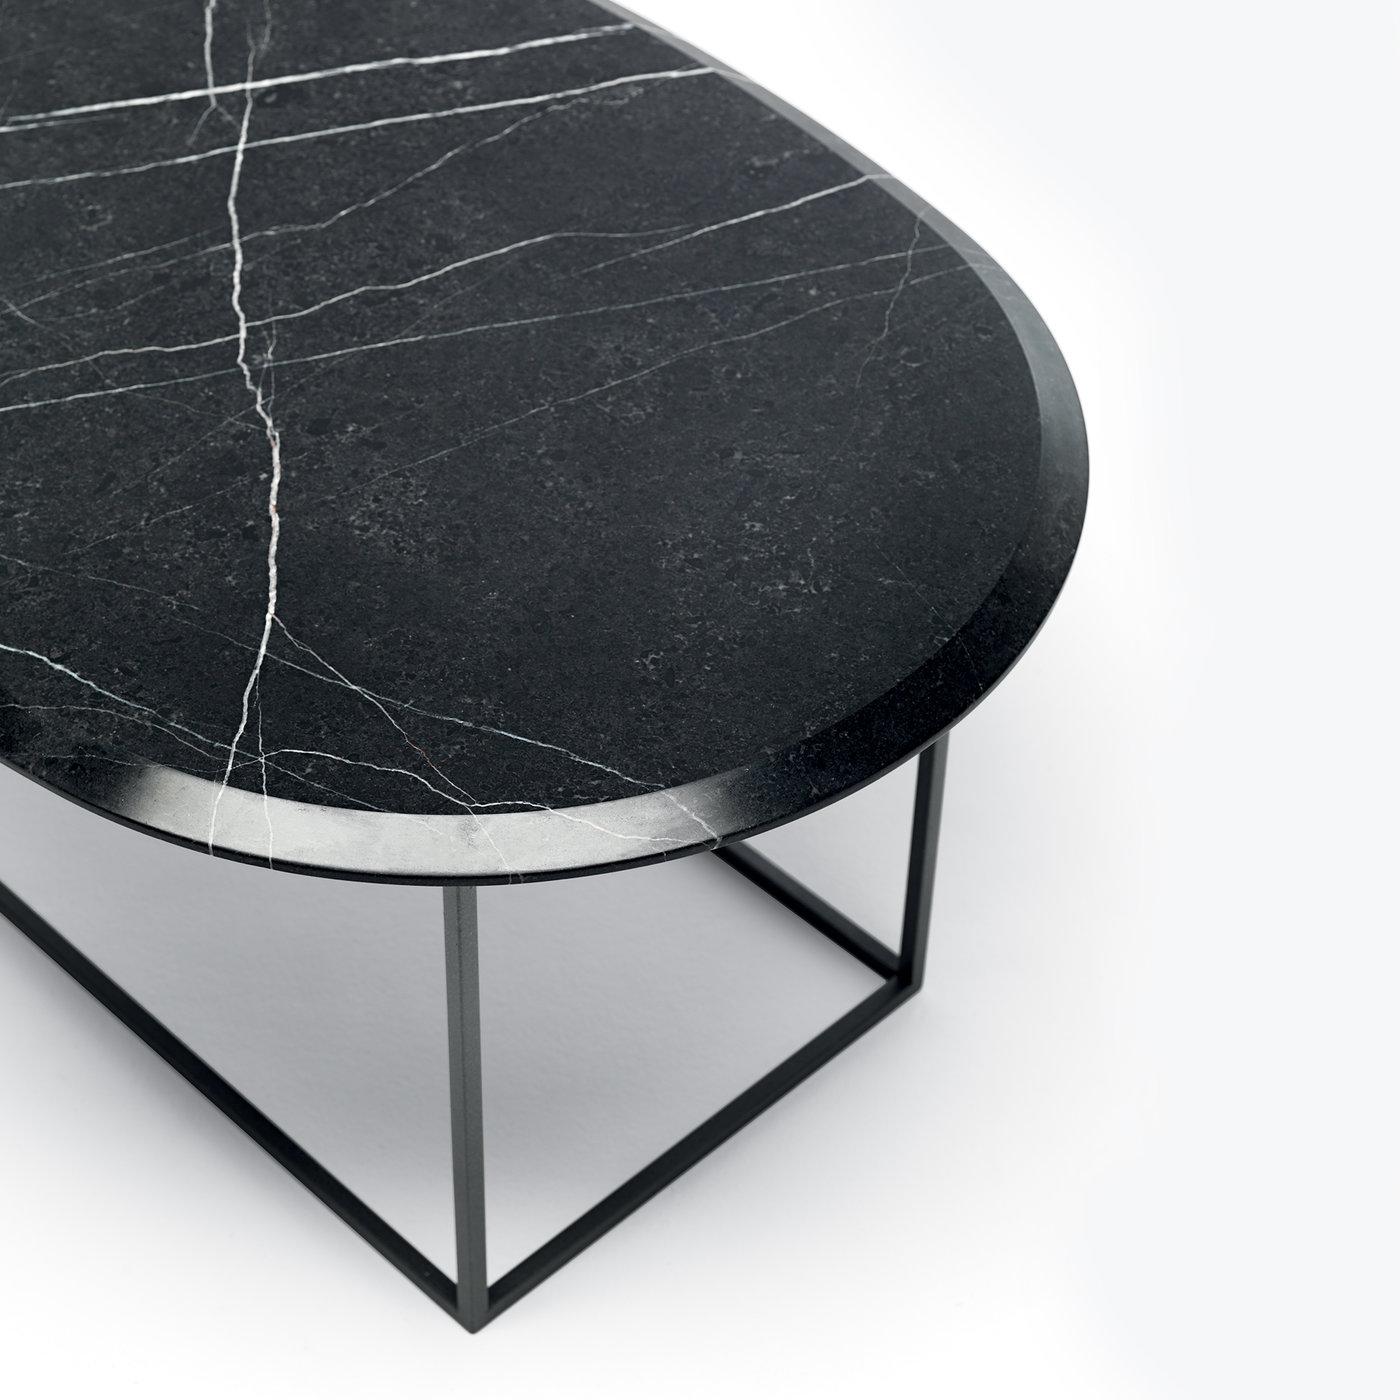 Exuding sleek, modern allure, this elegant coffee table will coordinate elegantly with any modern decor thanks to the calibrated balance of angles and curves of its striking silhouette. Featuring a rectangular base made of thin squared metal tubing